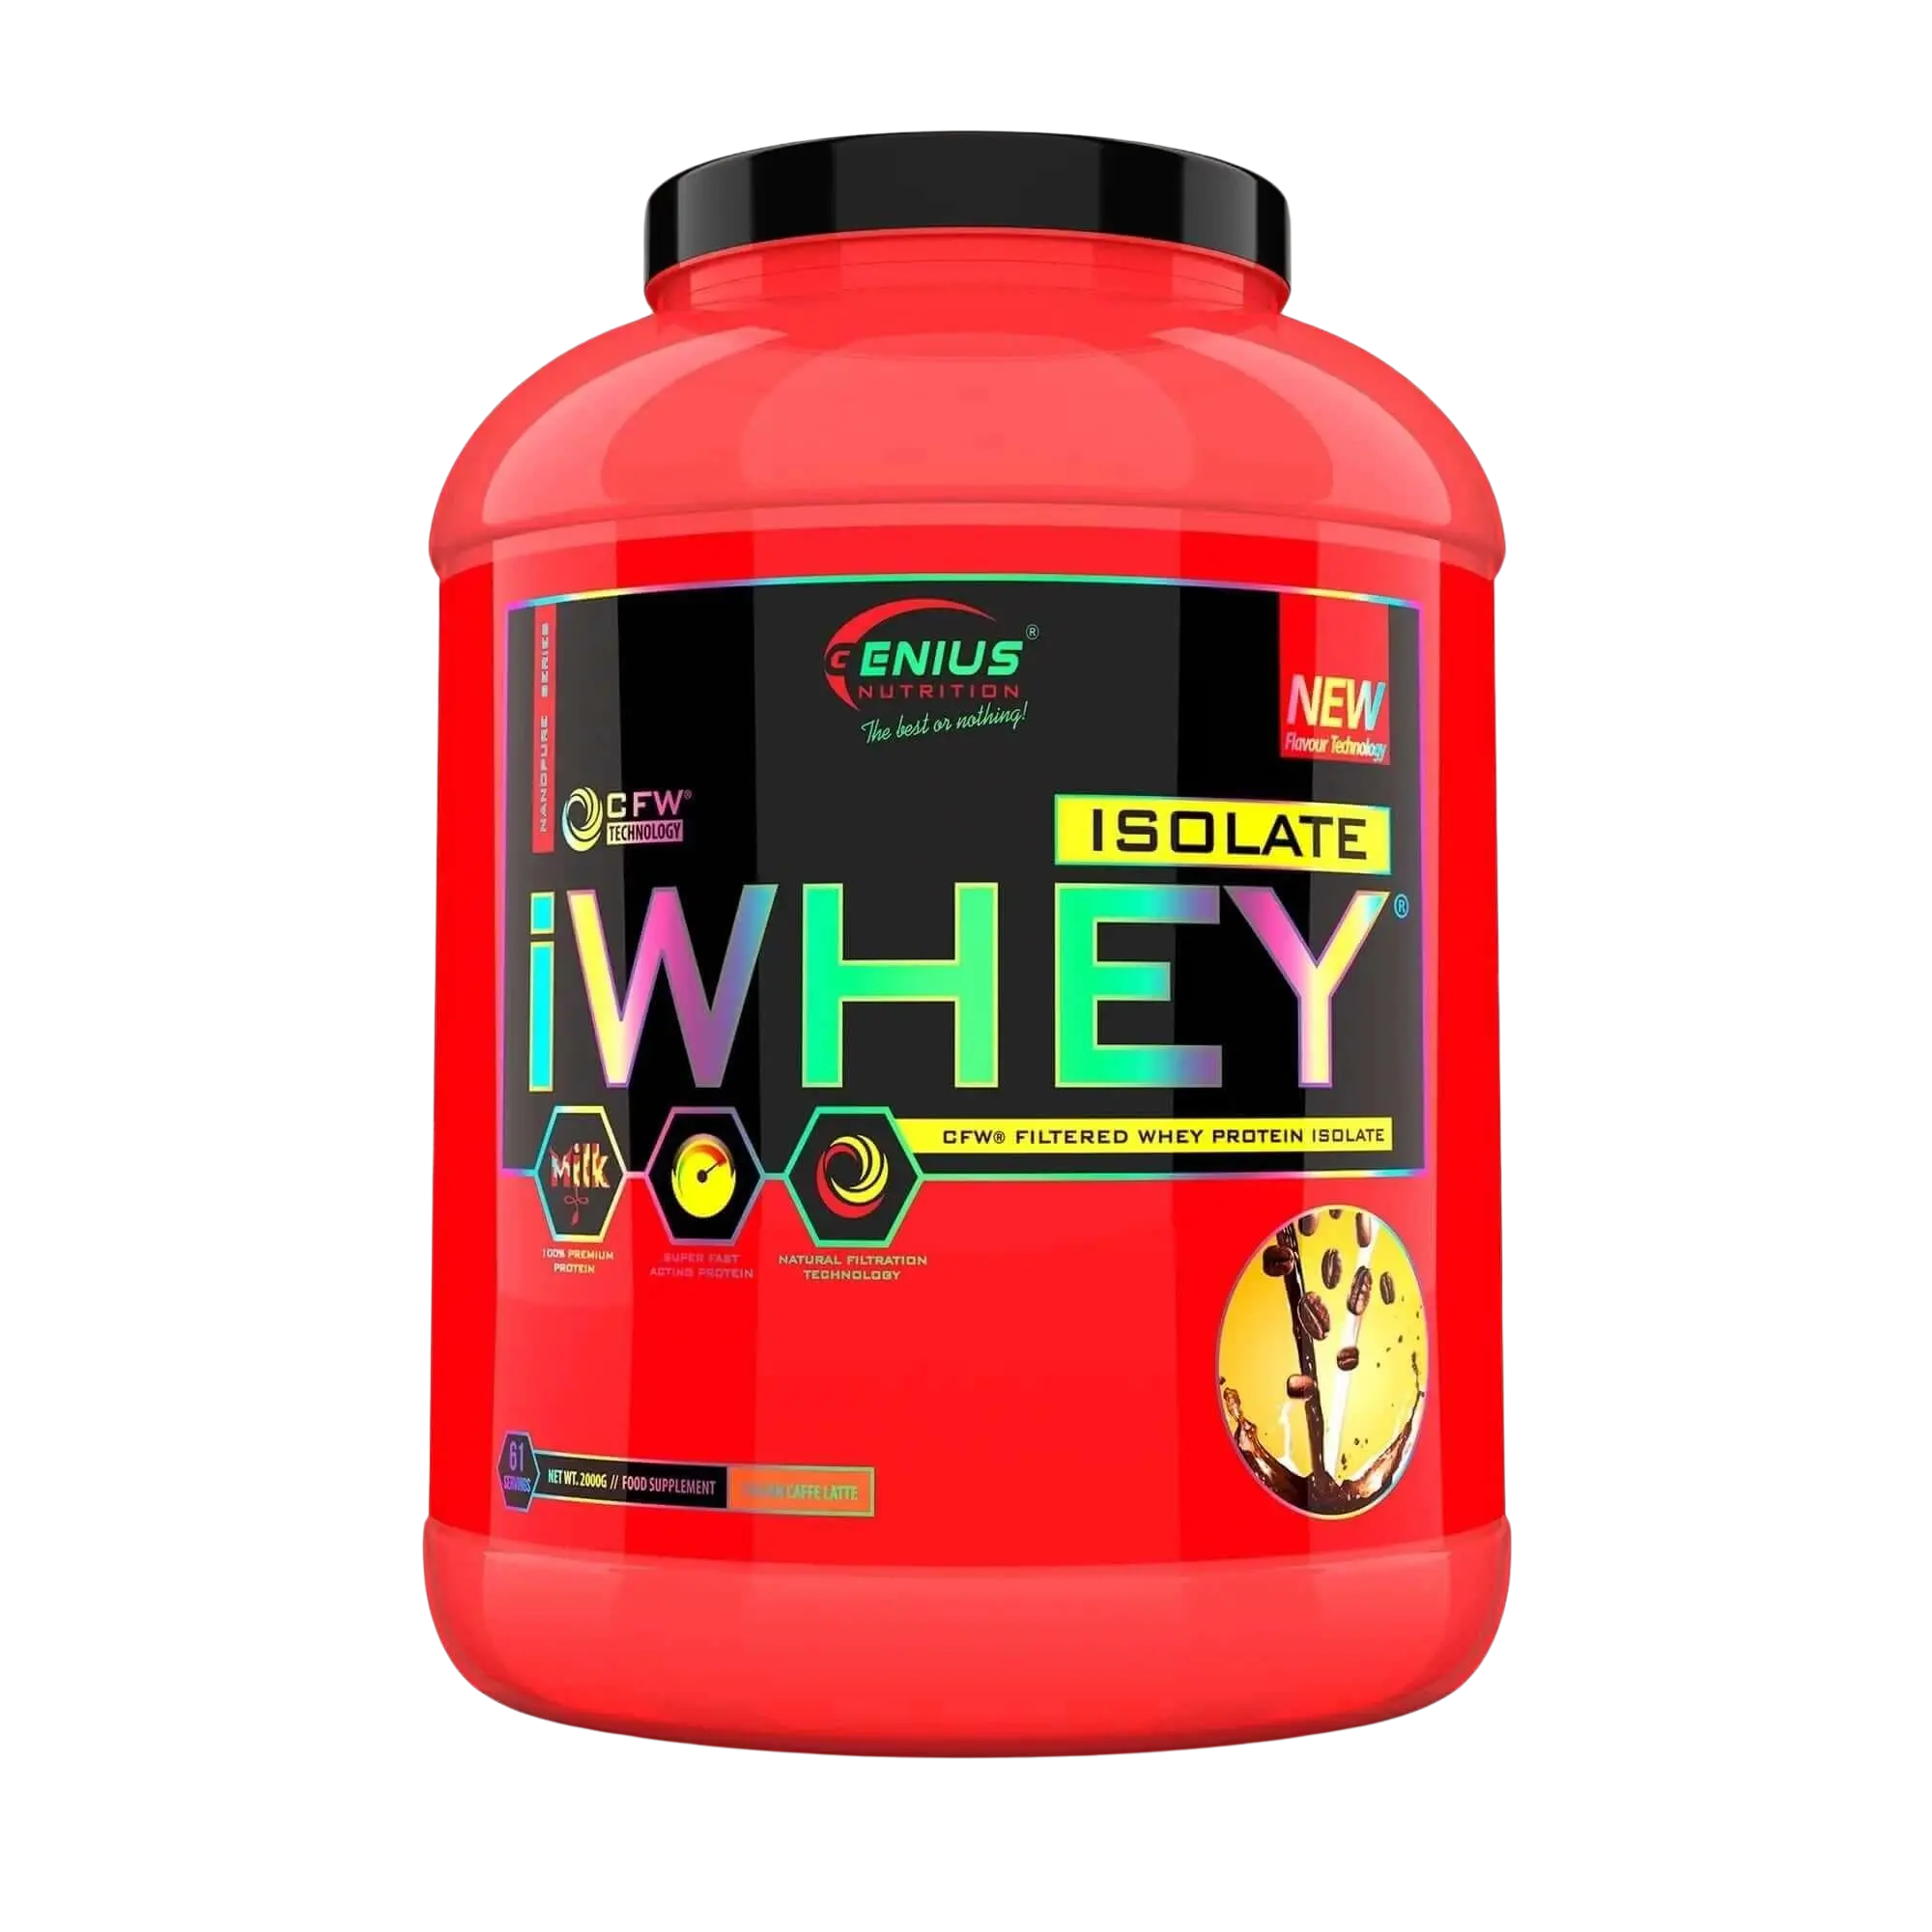 whey iwhey isolate protein Café Latte Italien 2000g genius nutrition